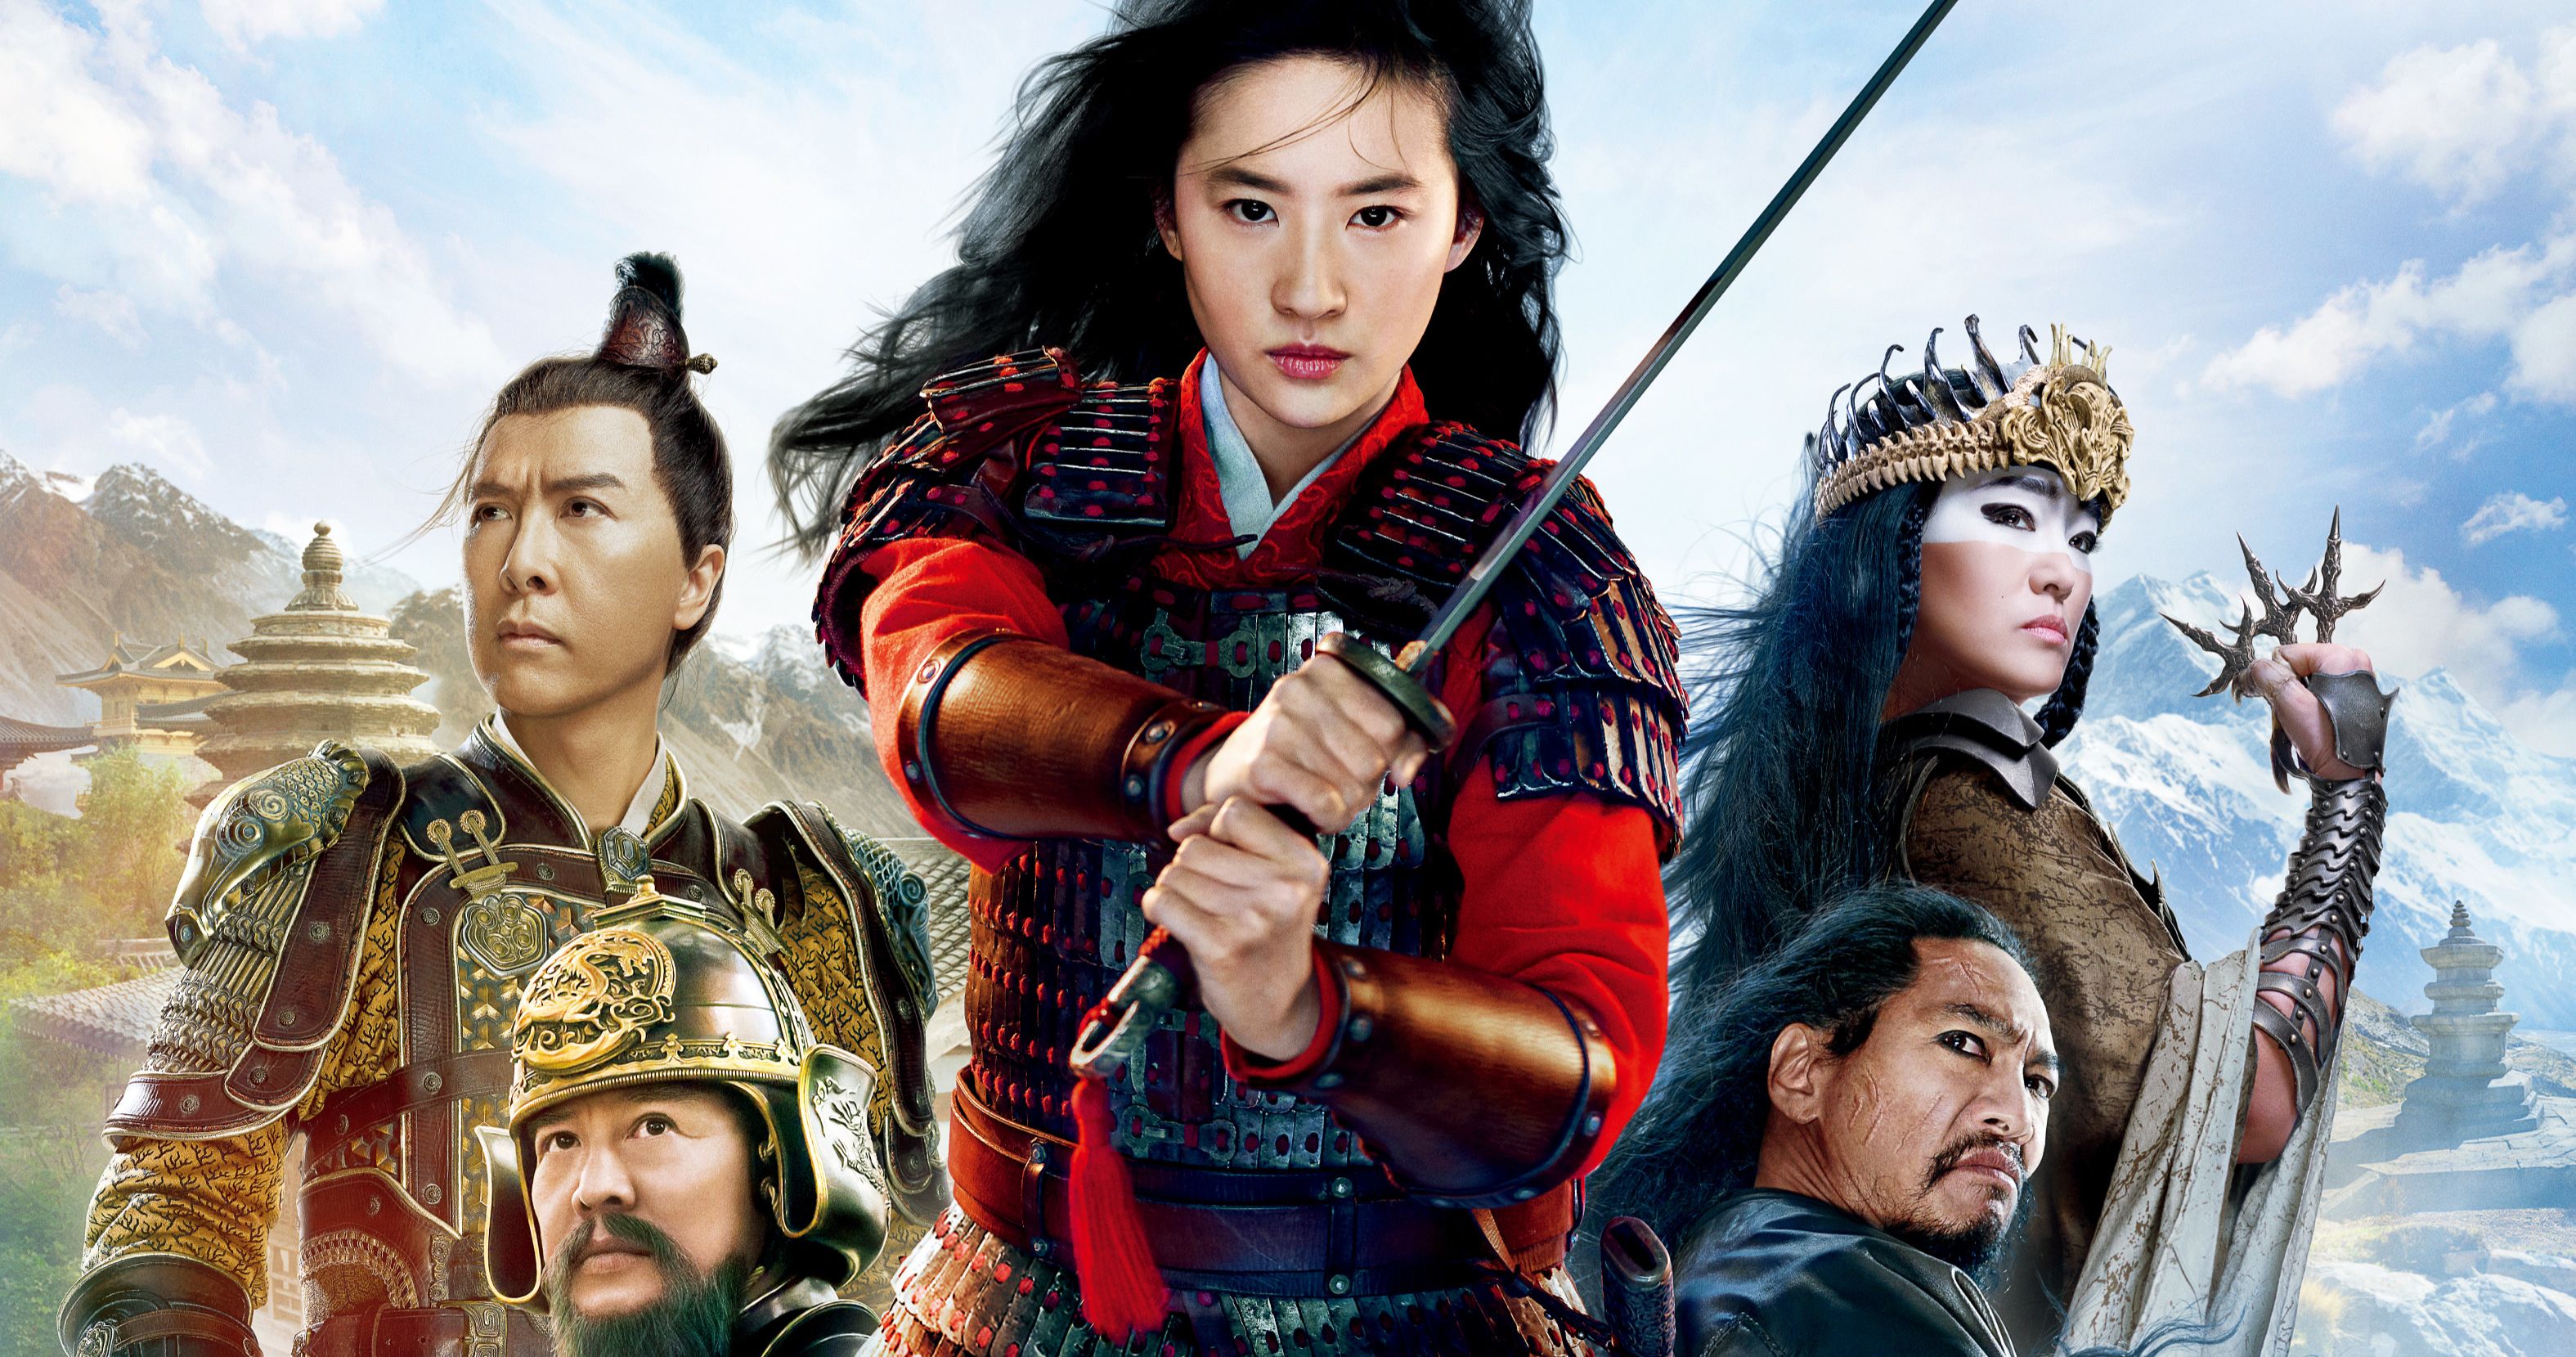 Mulan Review: A Soaring Epic That Will Thrill Global Audiences